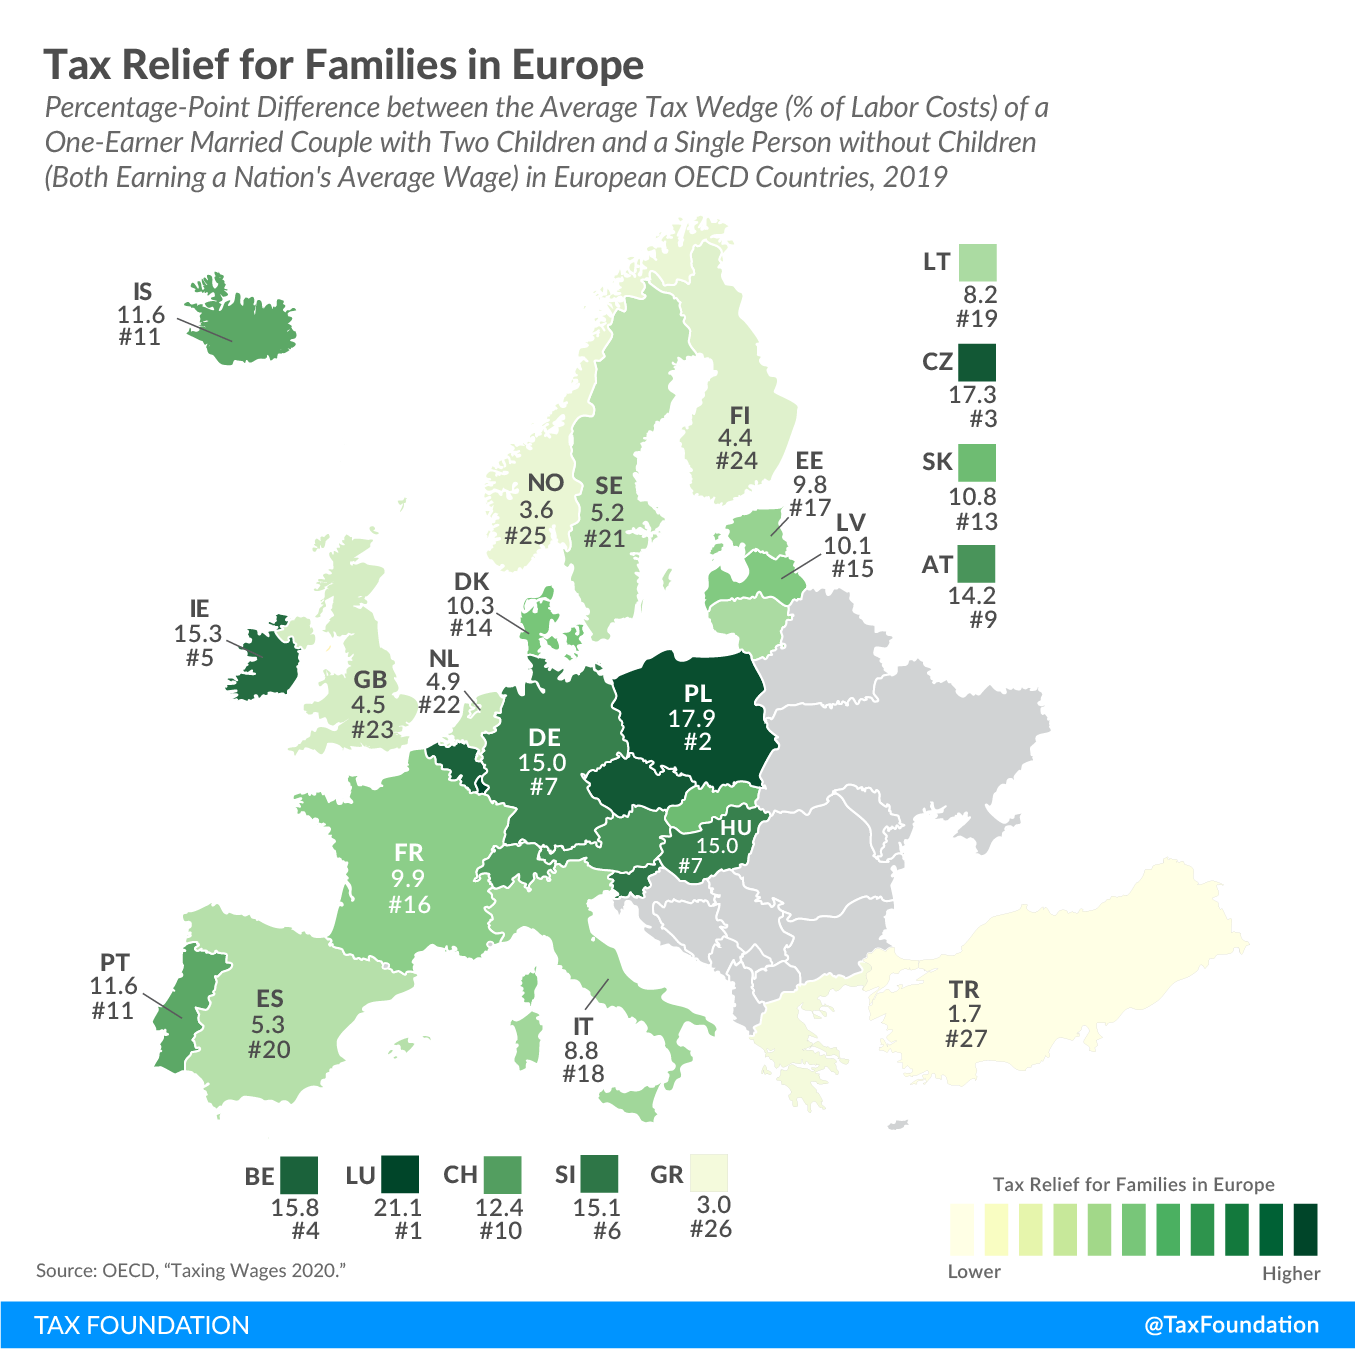 Tax relief for families in Europe 2020, One way to measure targeted tax relief for families is to compare the tax burdens on labor of a family with one earner and two children and a single worker without children, both earning the same pretax income. The tax burden on labor, or “tax wedge,” is defined as the difference between an employer’s total labor cost of an employee and the employee’s net disposable income. In other words, it is the sum of income taxes and payroll taxes of a worker earning the average wage in a country, divided by the total labor cost of this worker.